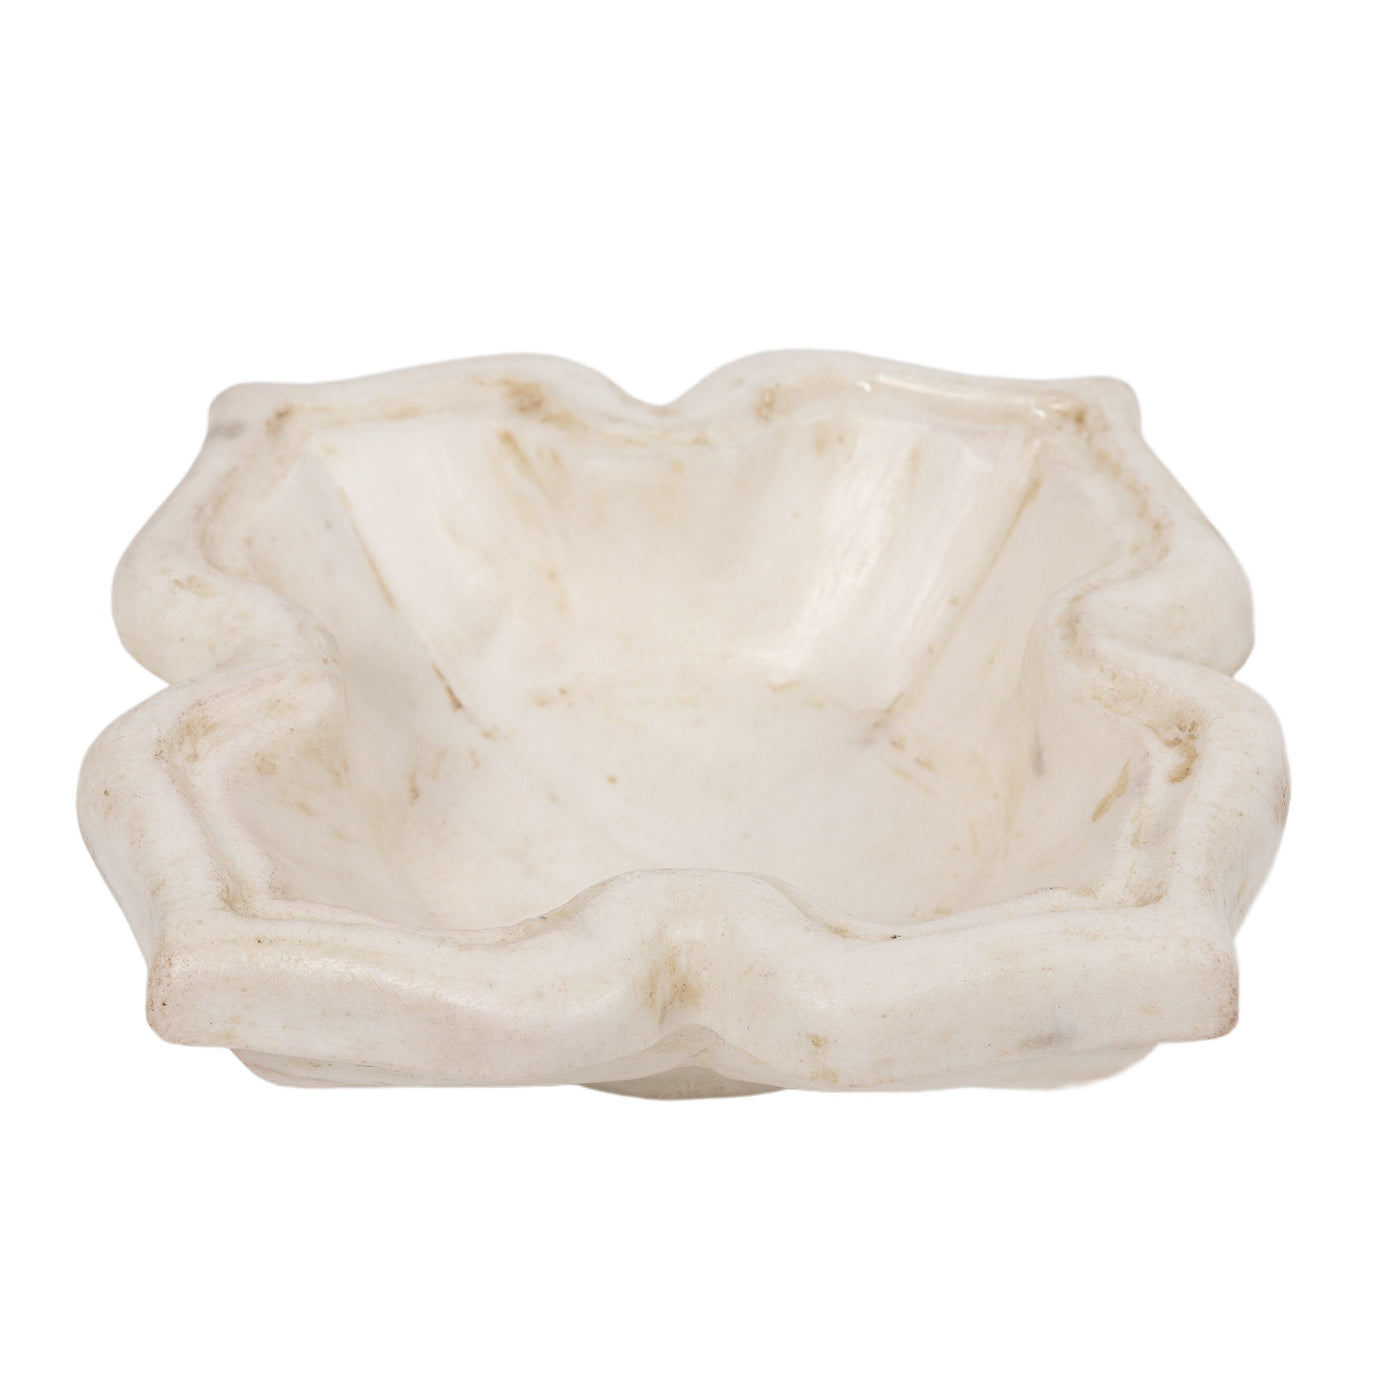 Marble Floral Bowl - Small